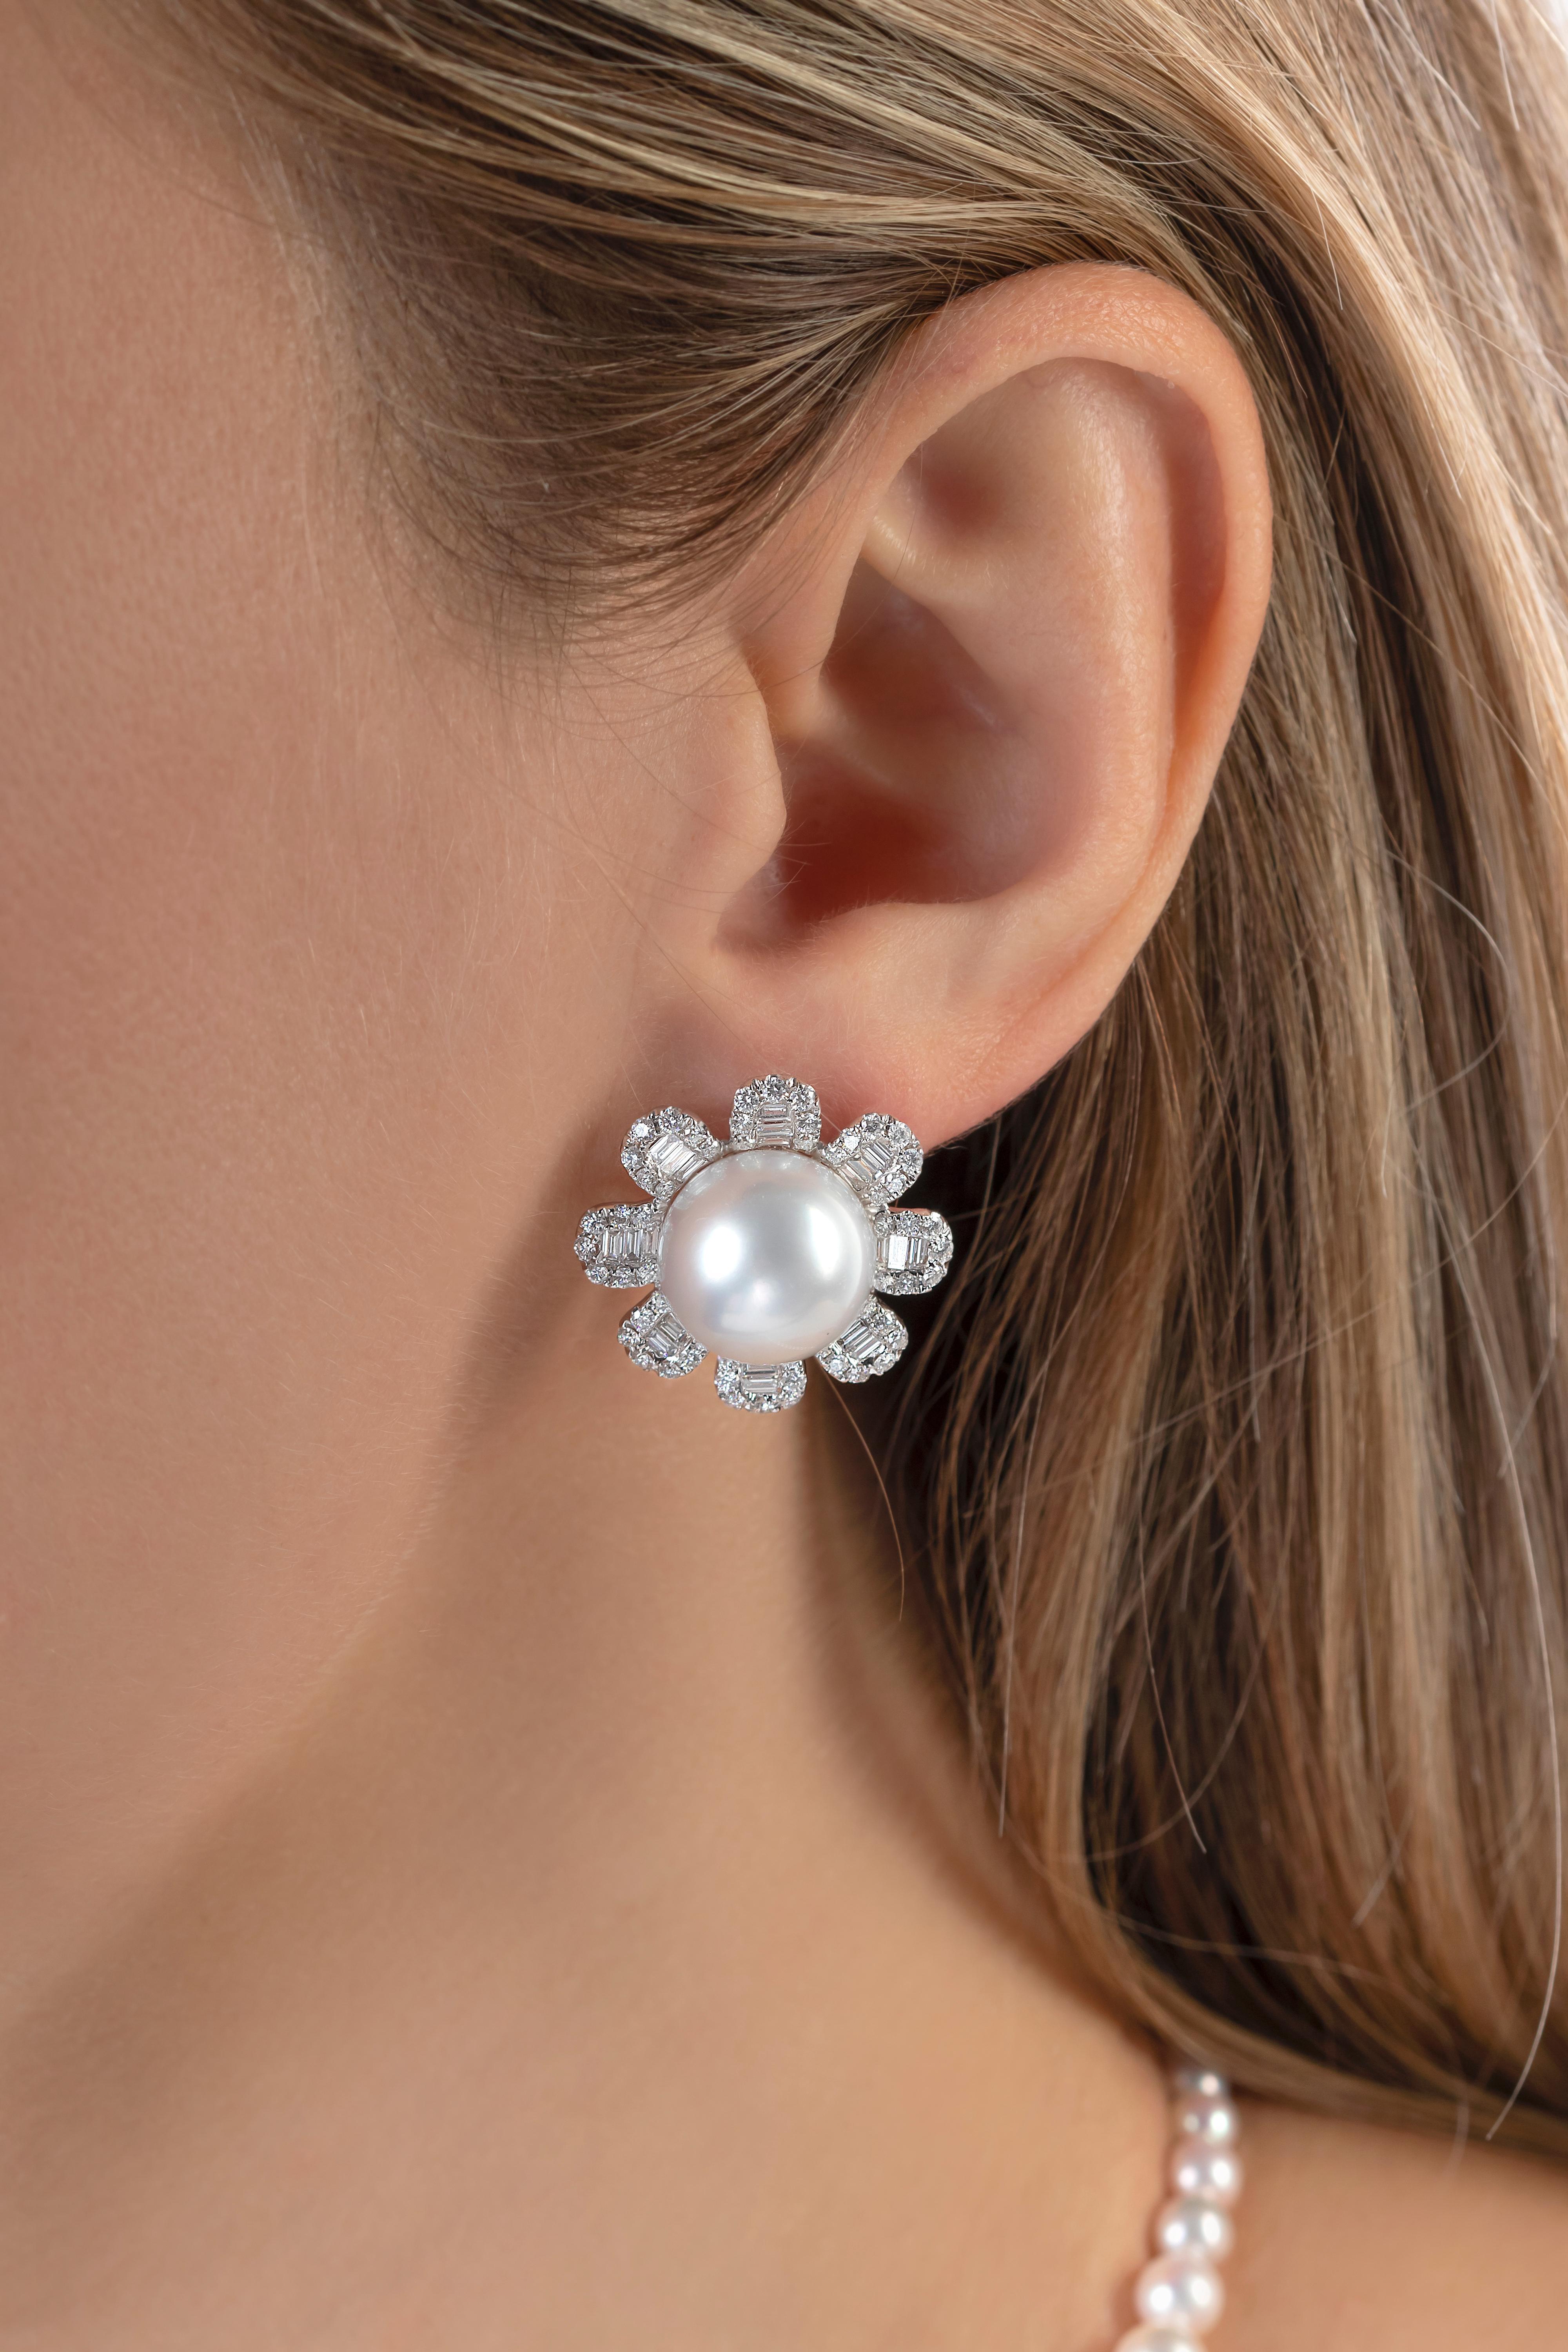 These unique earrings by Yoko London feature lustrous South Sea pearls set in the centre of scintillating diamond petals. The South Sea pearls have been selected for their high lustre and set in our London atelier. The perfect companion for any